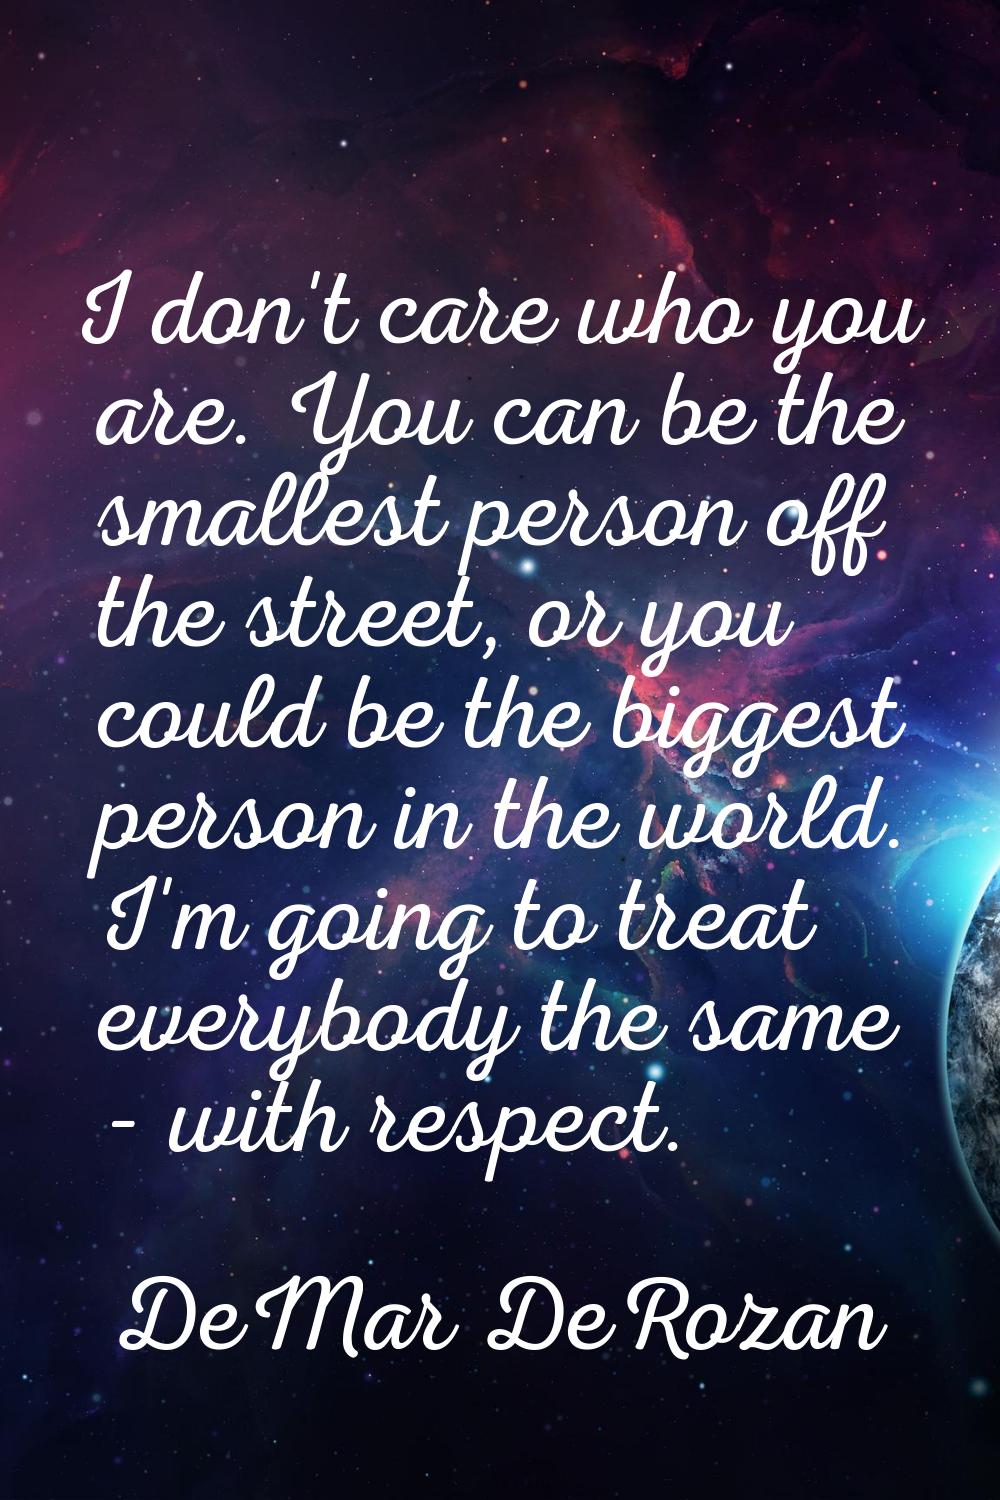 I don't care who you are. You can be the smallest person off the street, or you could be the bigges